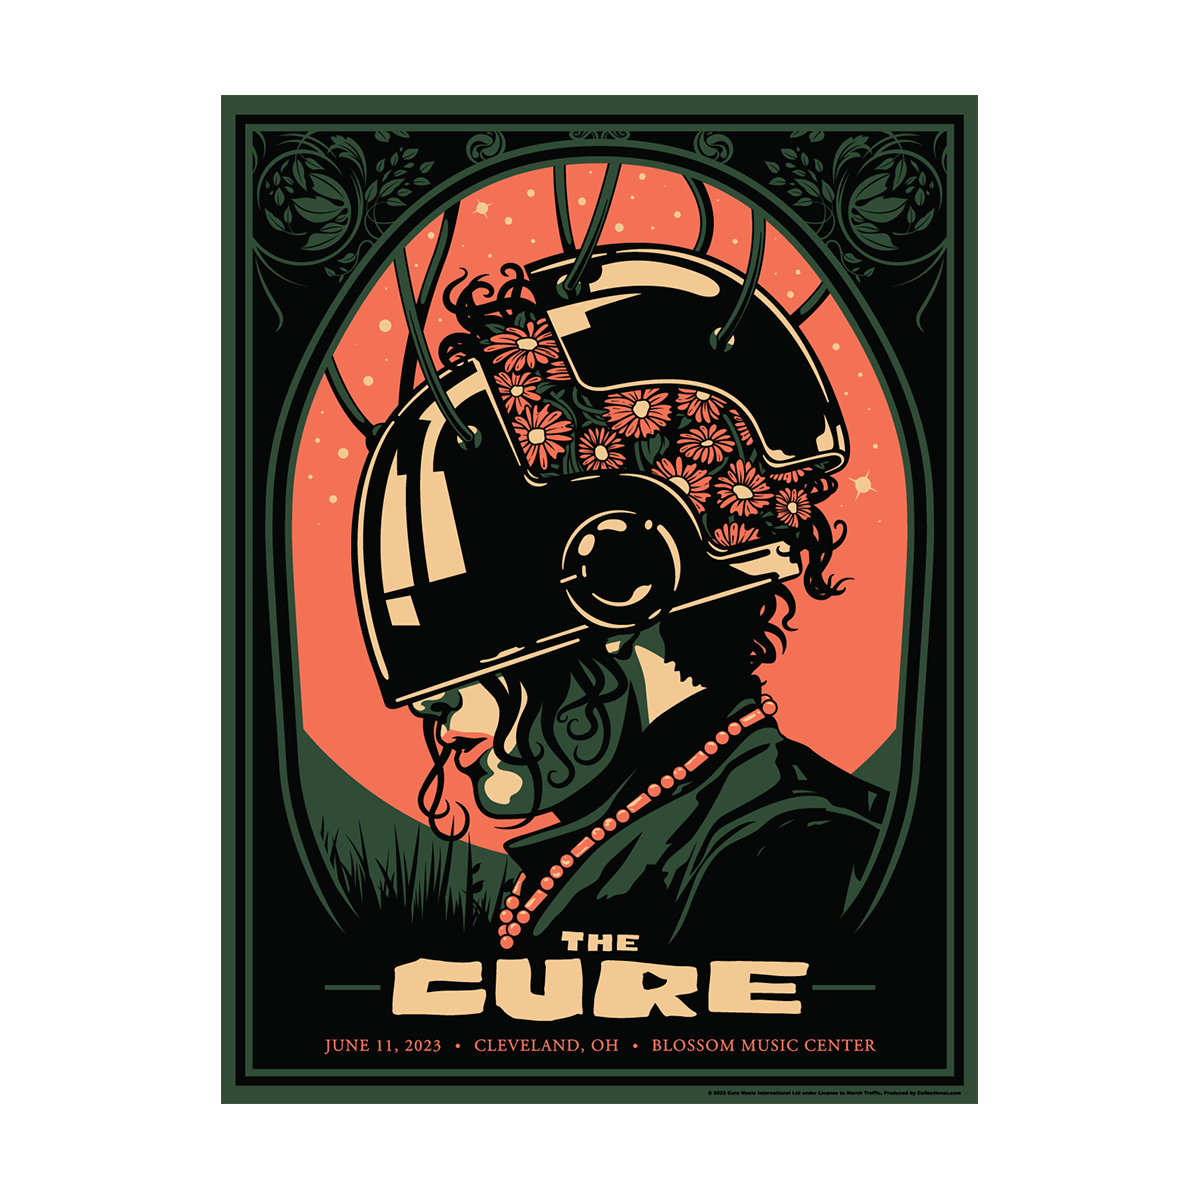 THE CURE - CLEVELAND POSTER
#TheCure #SHOWSOFALOSTWORLD2023